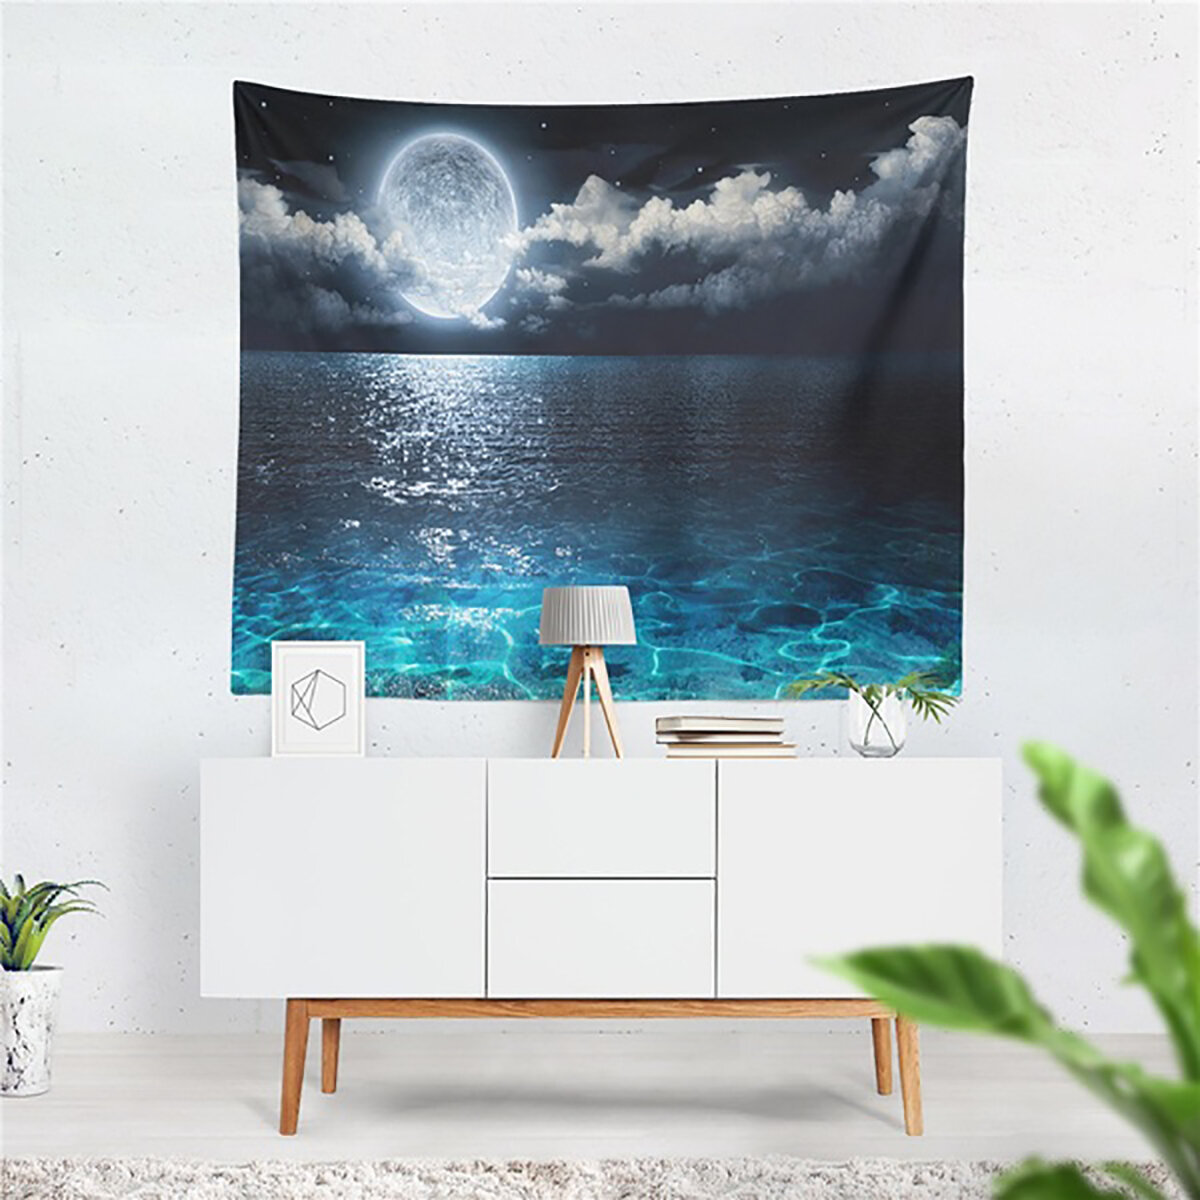 Sea Moon Tapestry Home Living Room Wall Hanging Background Decor Tapestry Cloth Art Wall Blanket Bea